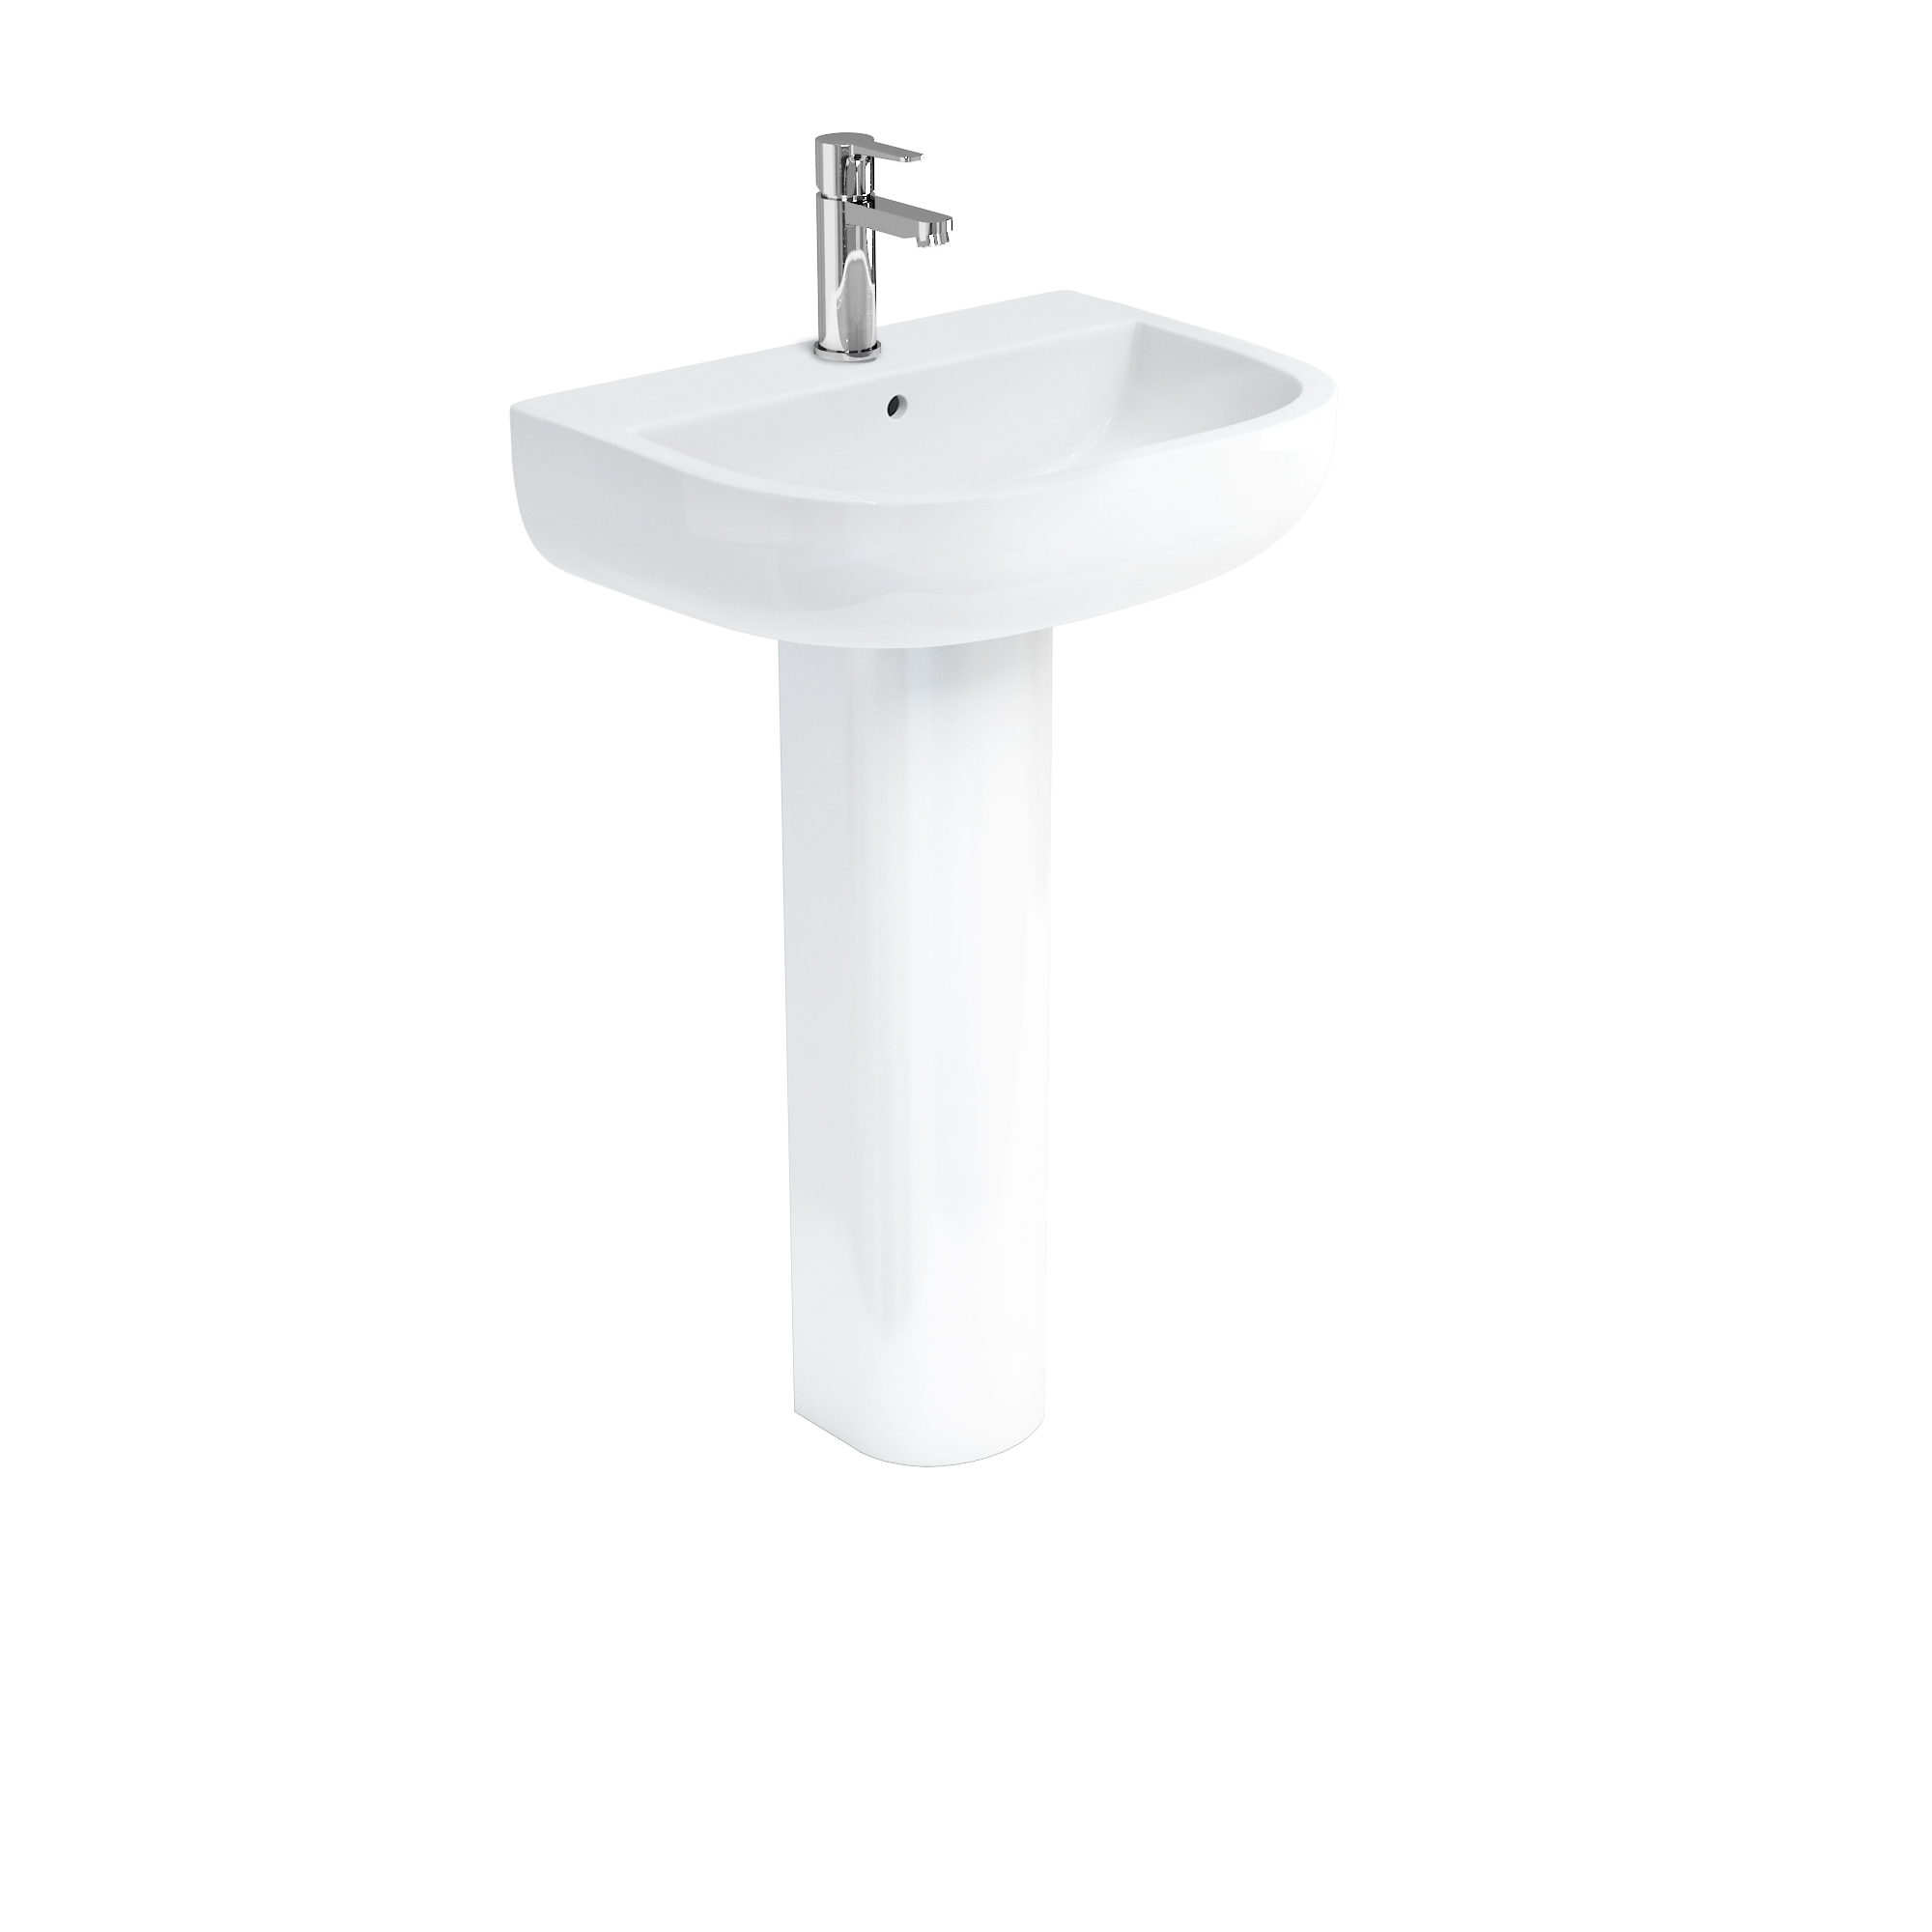 Compact 550 basin and round fronted pedestal